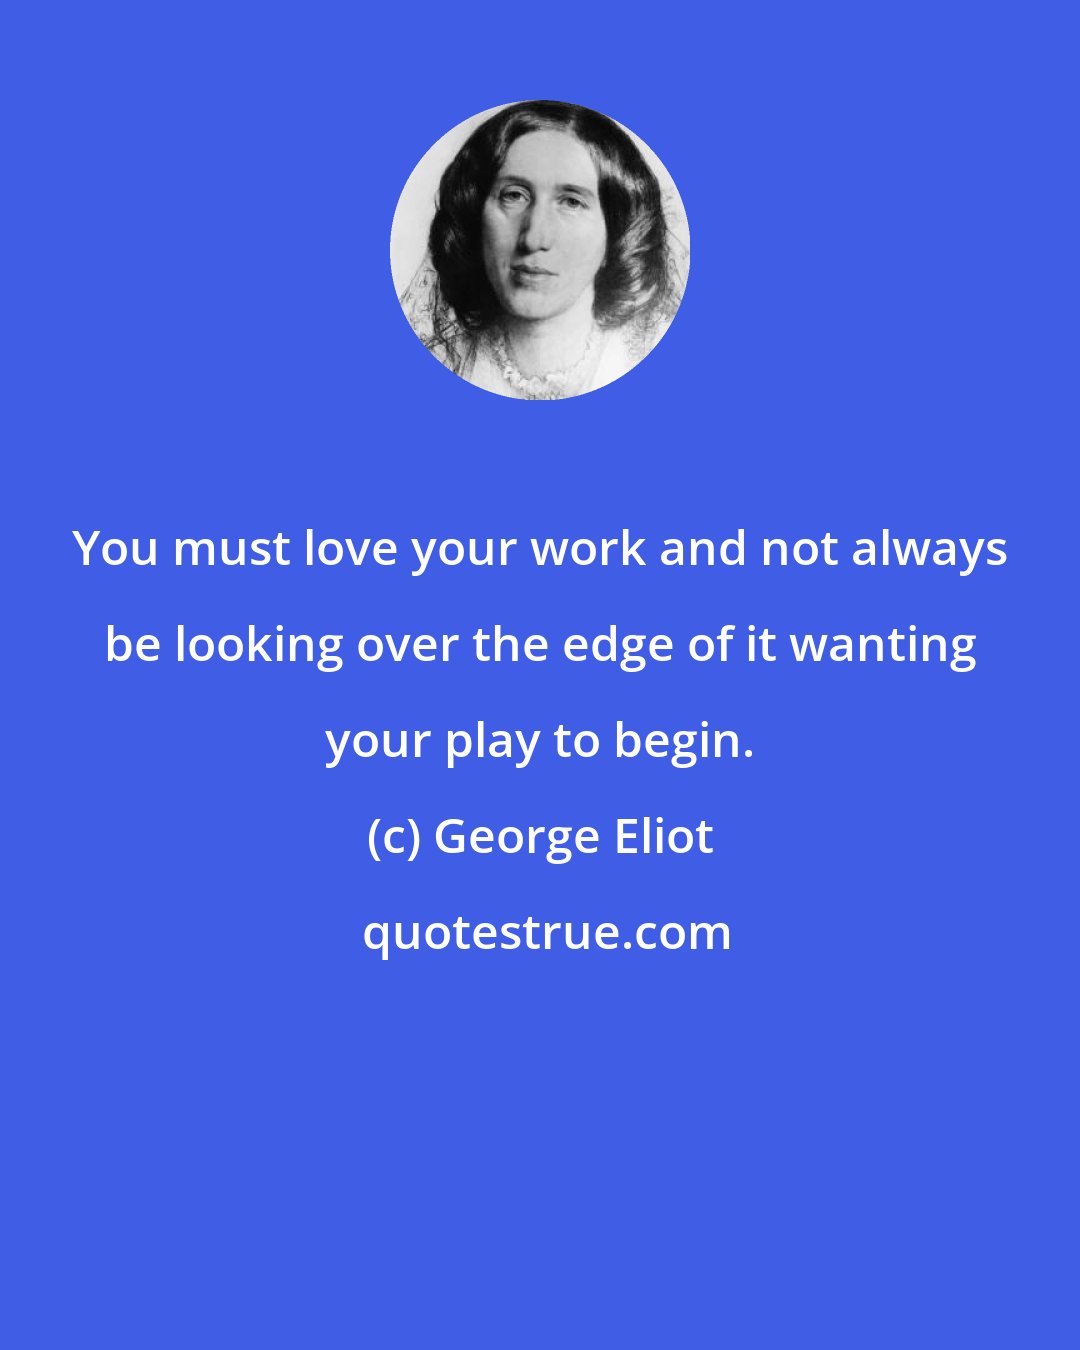 George Eliot: You must love your work and not always be looking over the edge of it wanting your play to begin.